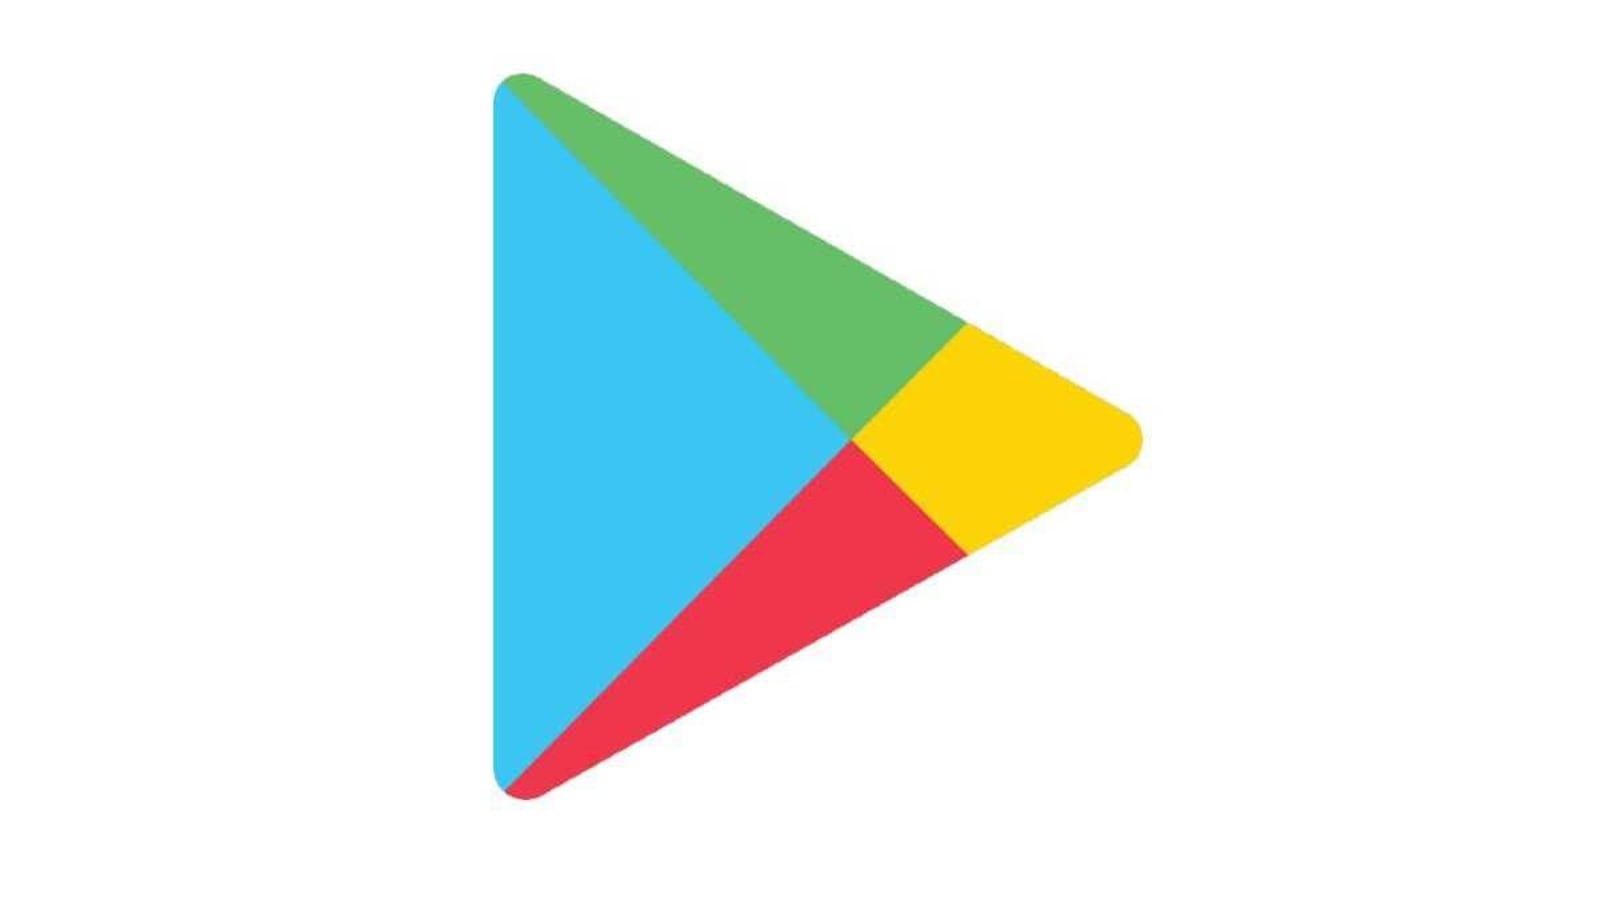 Google is working on ways to make the Play Store easier to navigate